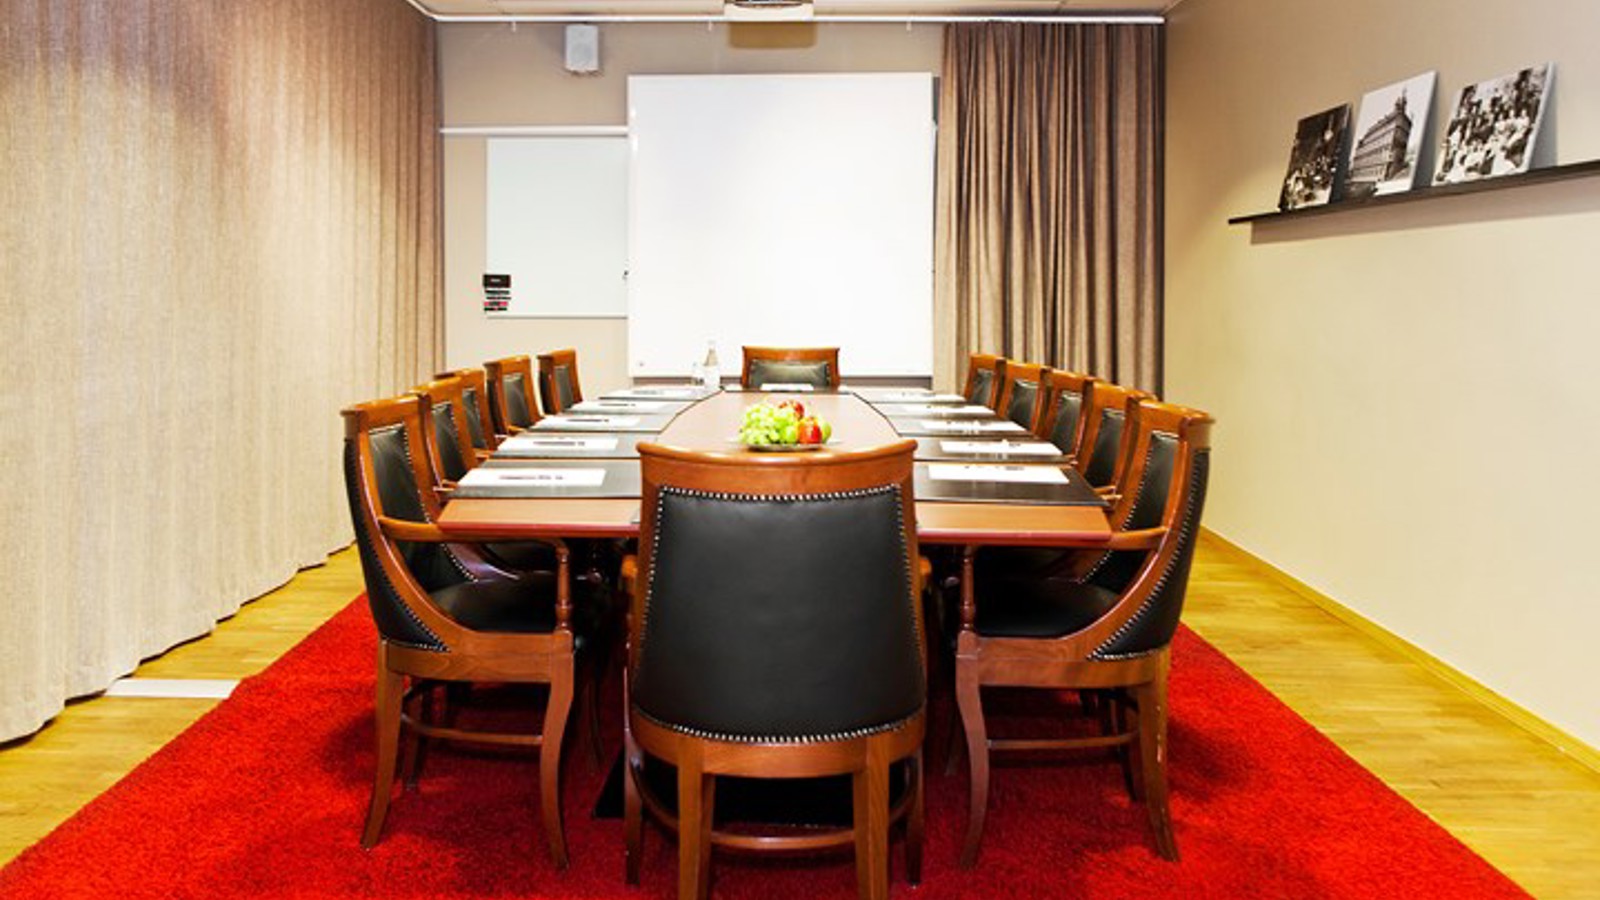 Conference room with board seating, red carpet and wooden furniture